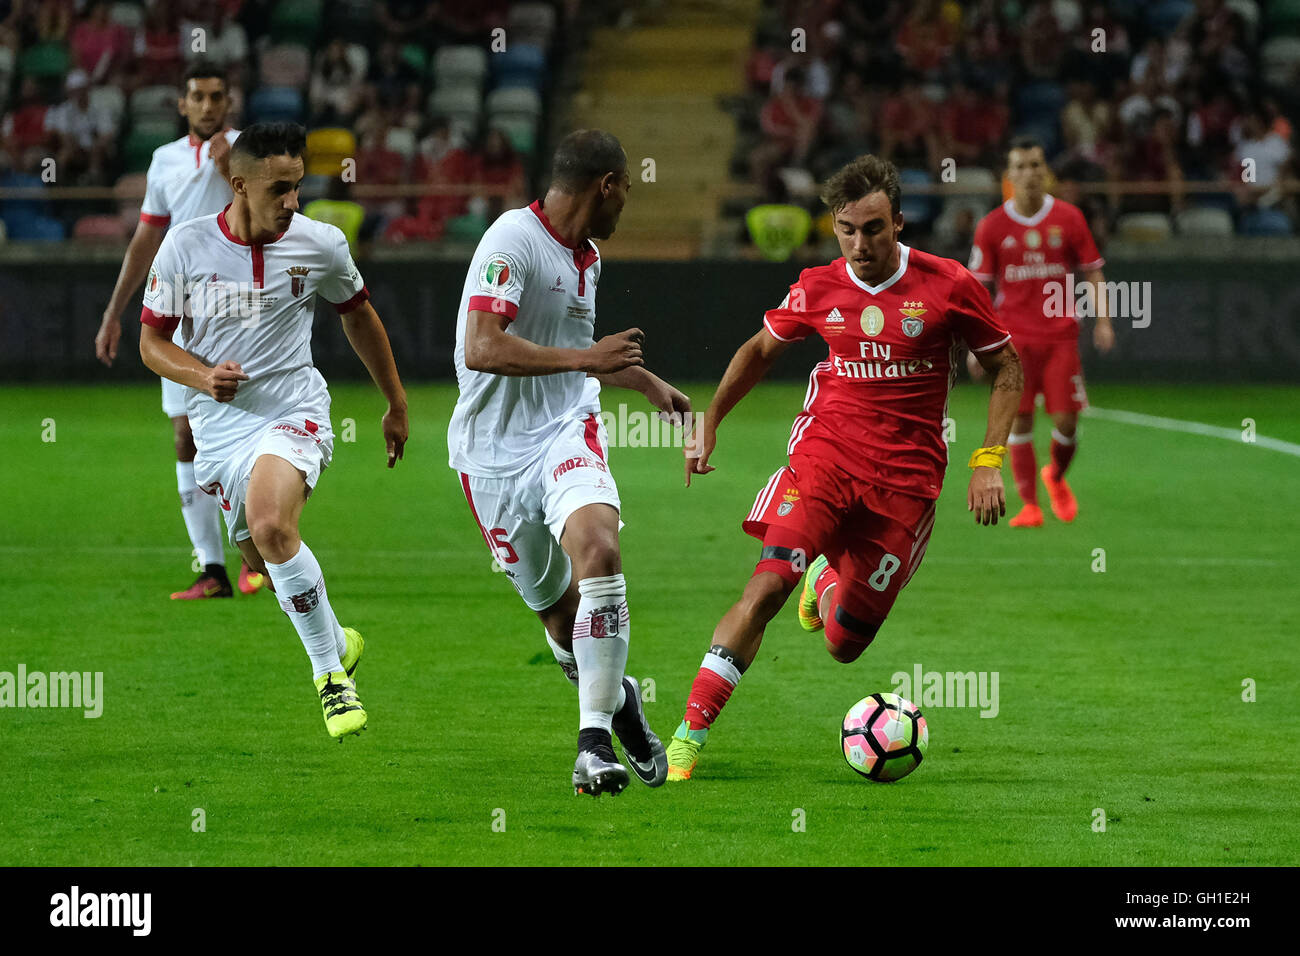 SL Benfica's Andre Horta vies for the ball with SC Braga's Baiano during the Supertaca Candido Oliveira football match in Aveiro, Portugal Stock Photo